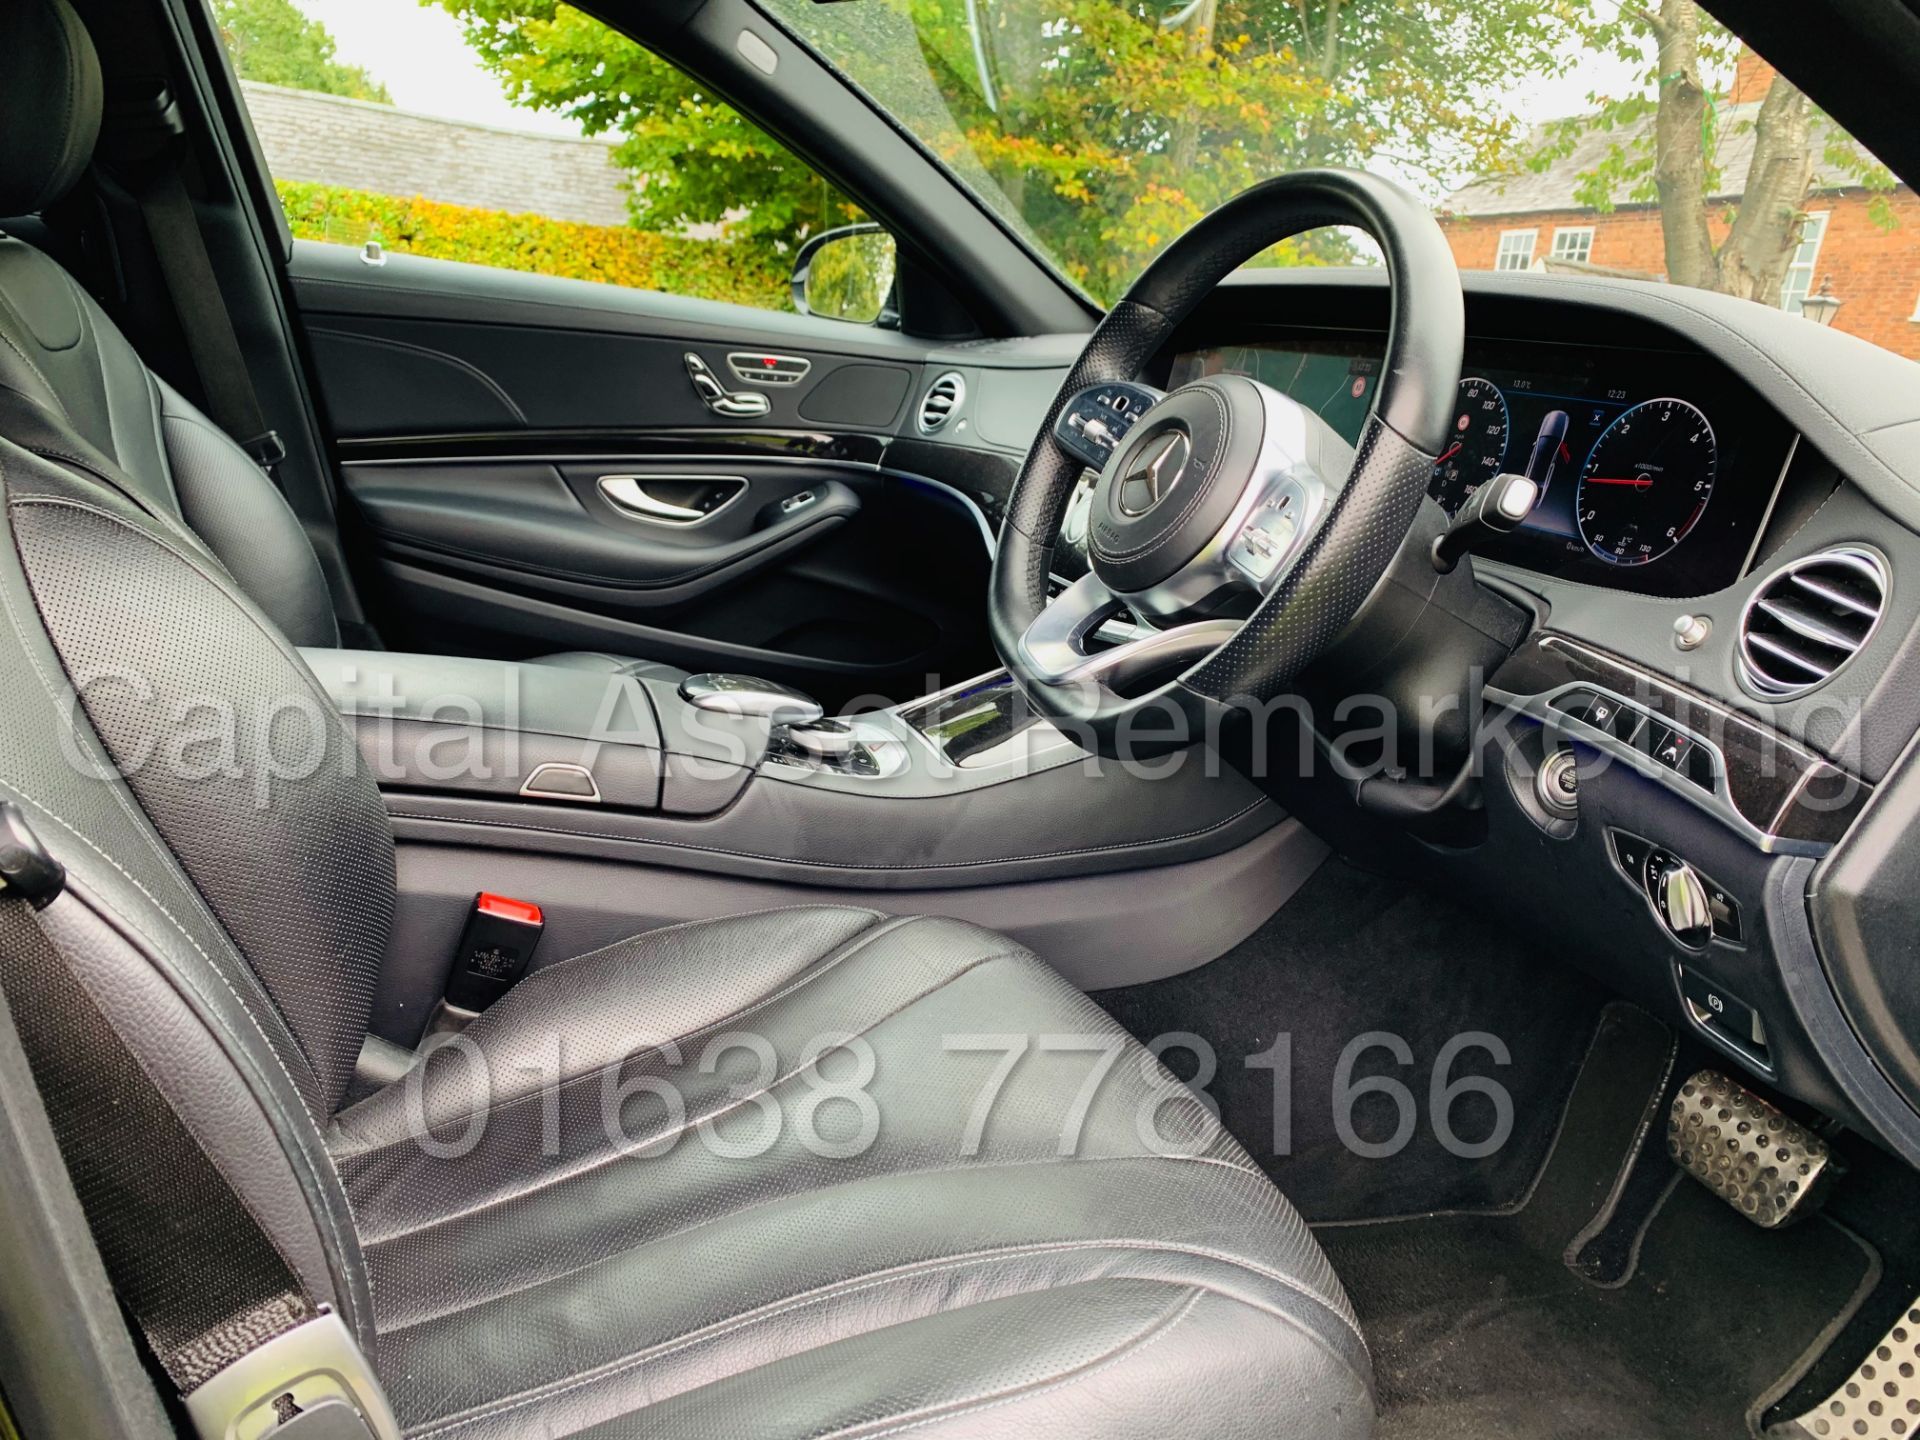 (ON SALE) MERCEDES-BENZ S350D *AMG LINE - SALOON* (2018) 9-G TRONIC - LEATHER - SAT NAV - Image 89 of 172